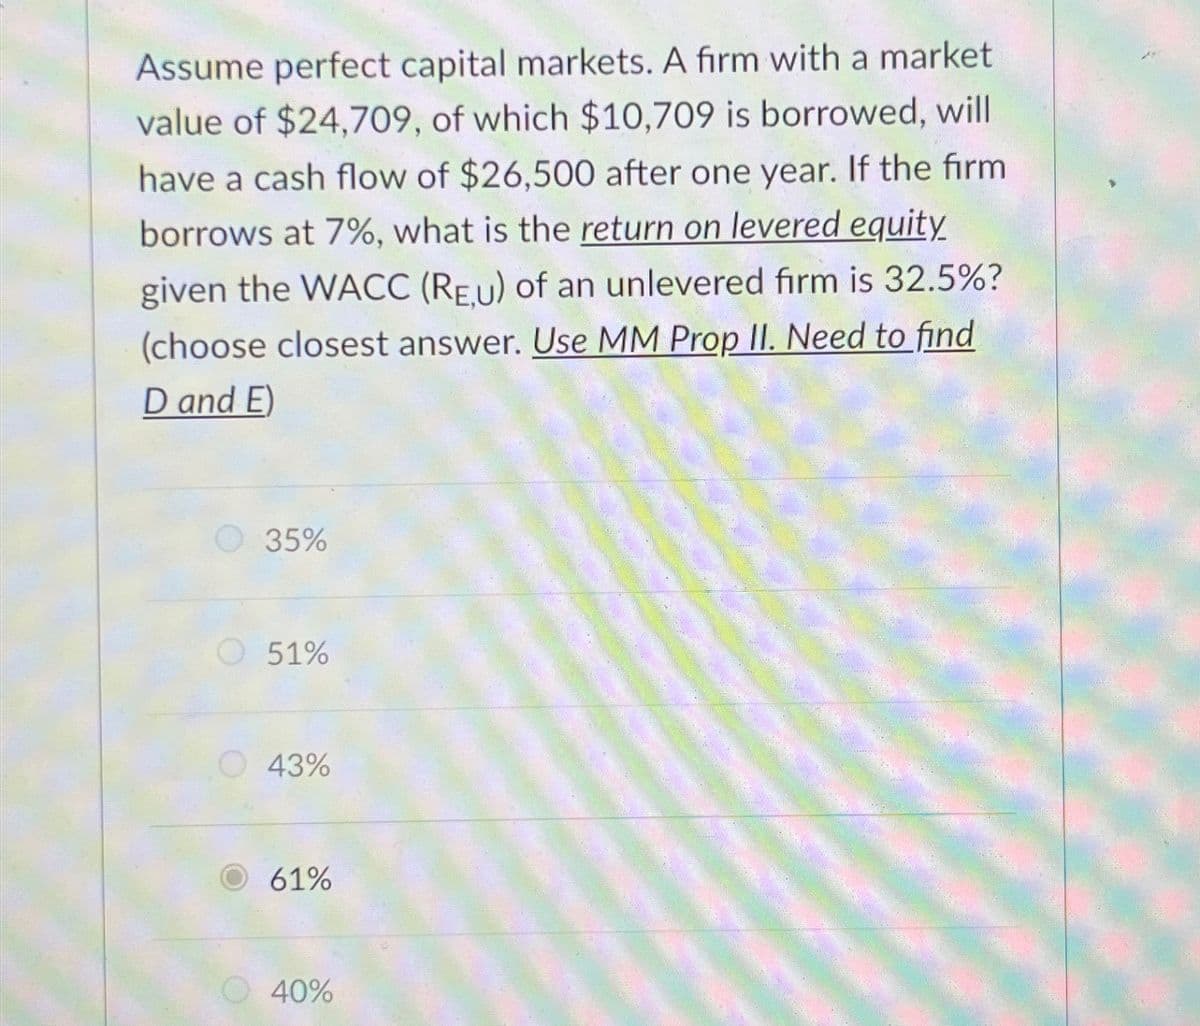 Assume perfect capital markets. A firm with a market
value of $24,709, of which $10,709 is borrowed, will
have a cash flow of $26,500 after one year. If the firm
borrows at 7%, what is the return on levered equity
given the WACC (REU) of an unlevered firm is 32.5%?
(choose closest answer. Use MM Prop II. Need to find
D and E)
35%
51%
43%
61%
40%